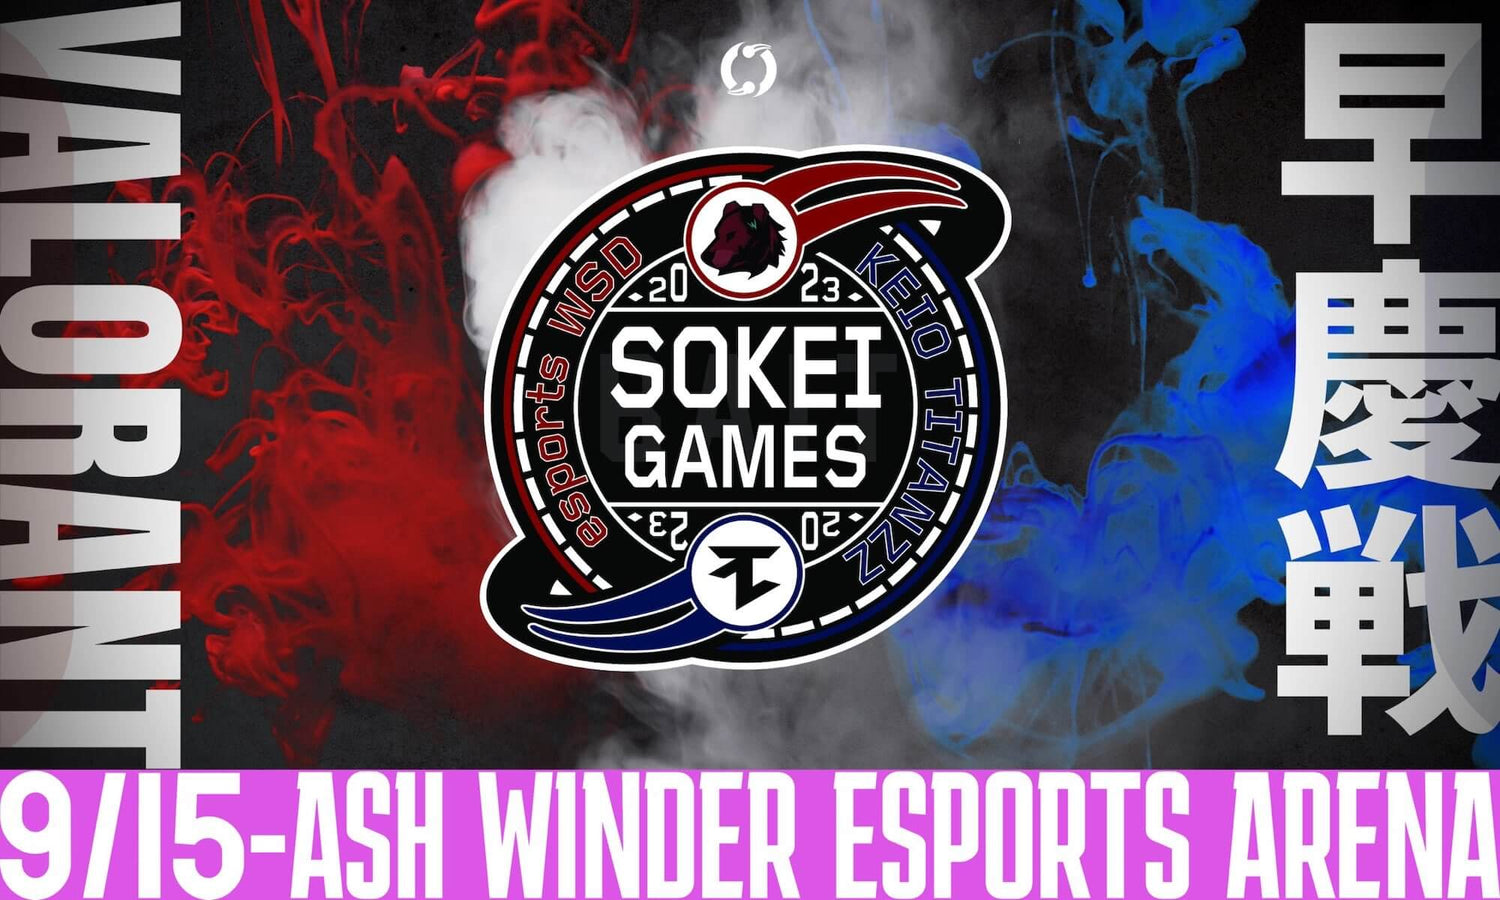 e-sports SOKEI GAMES Supported by BAIT